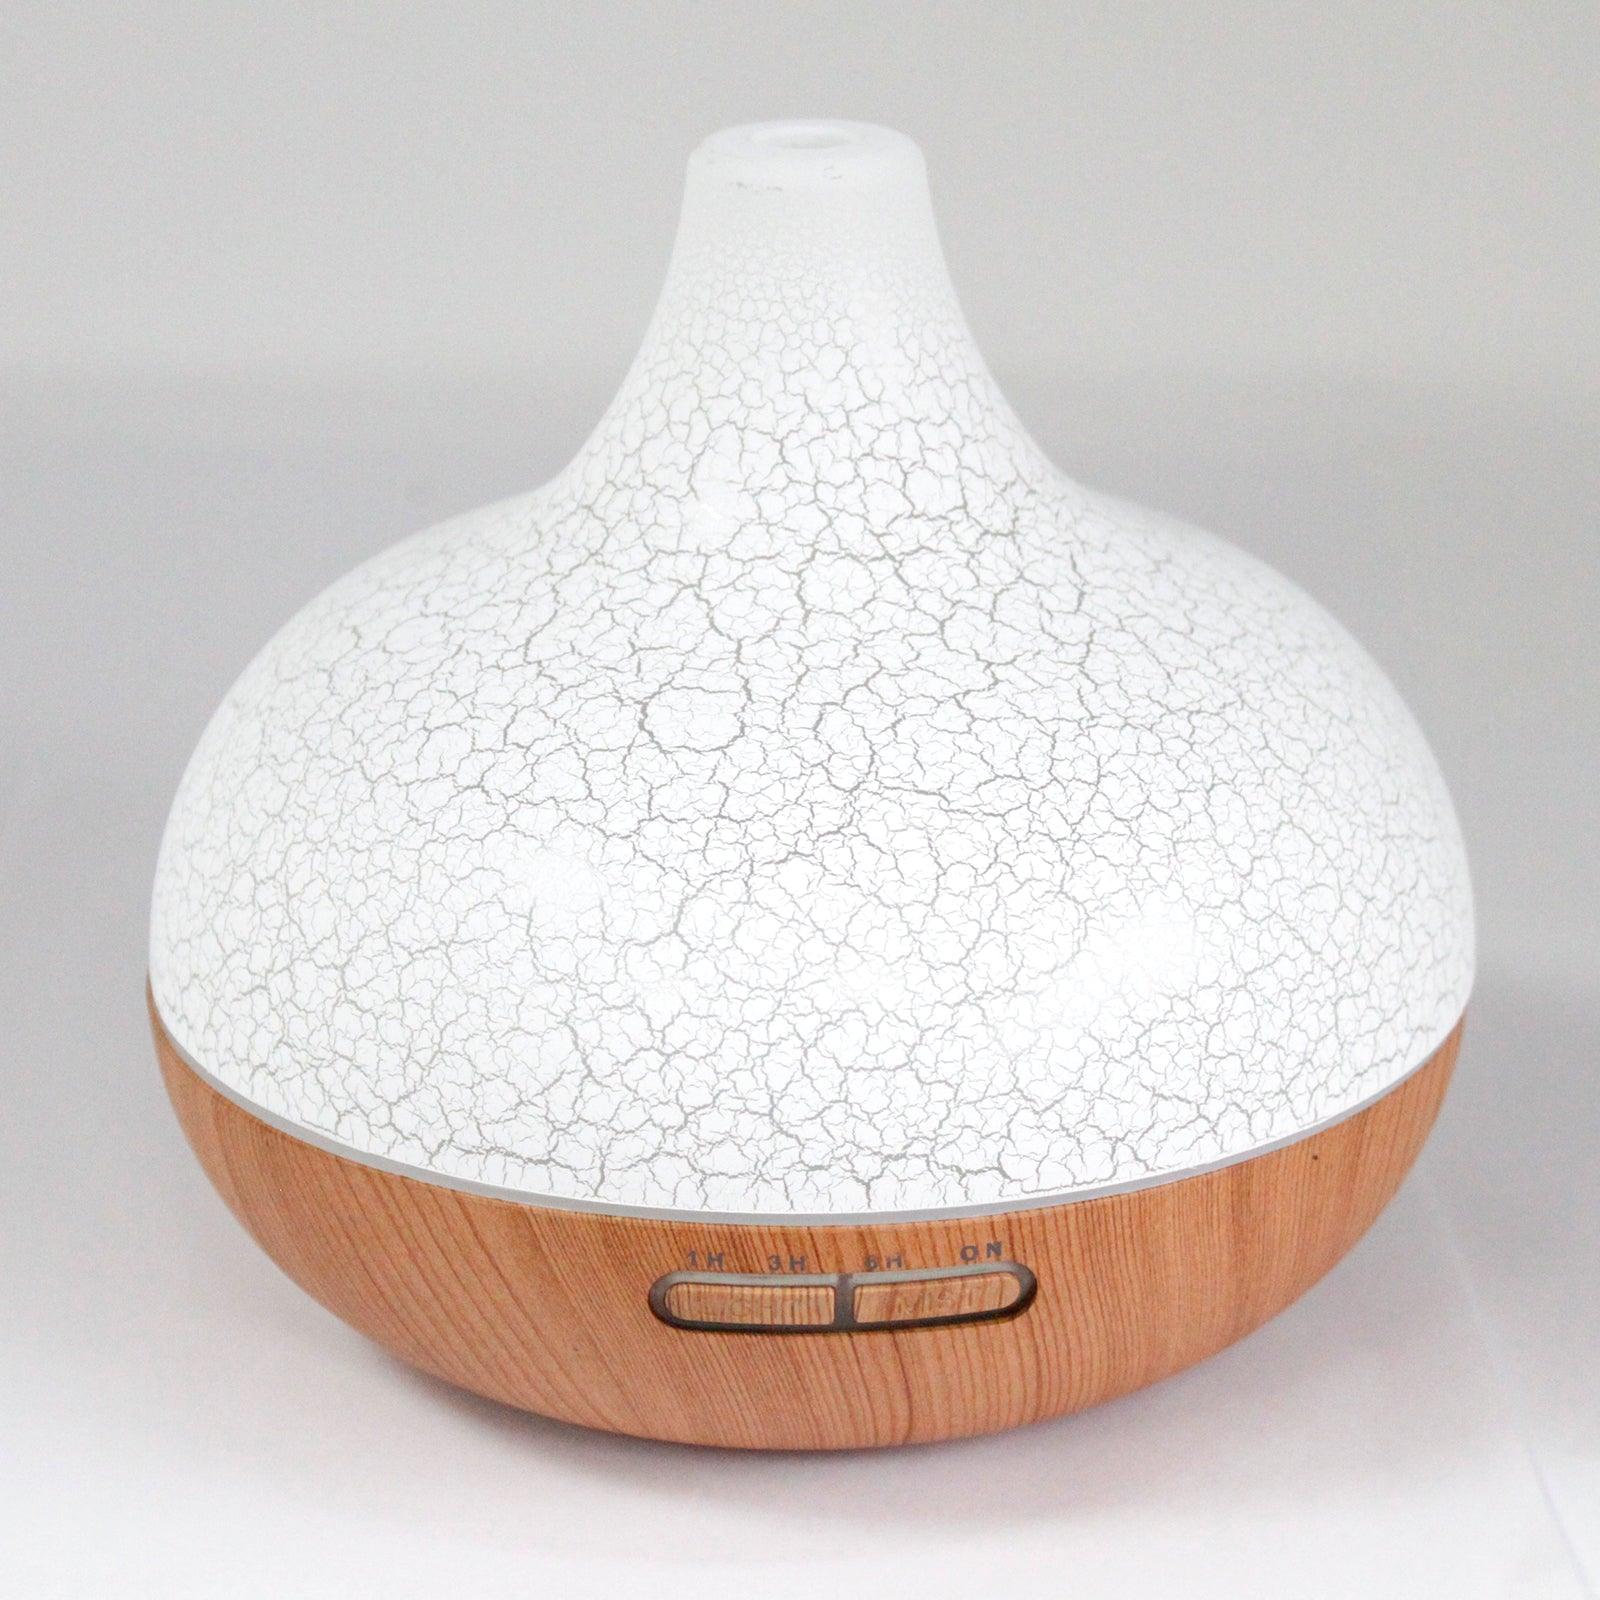 Aroma Diffusers - Charming Spaces